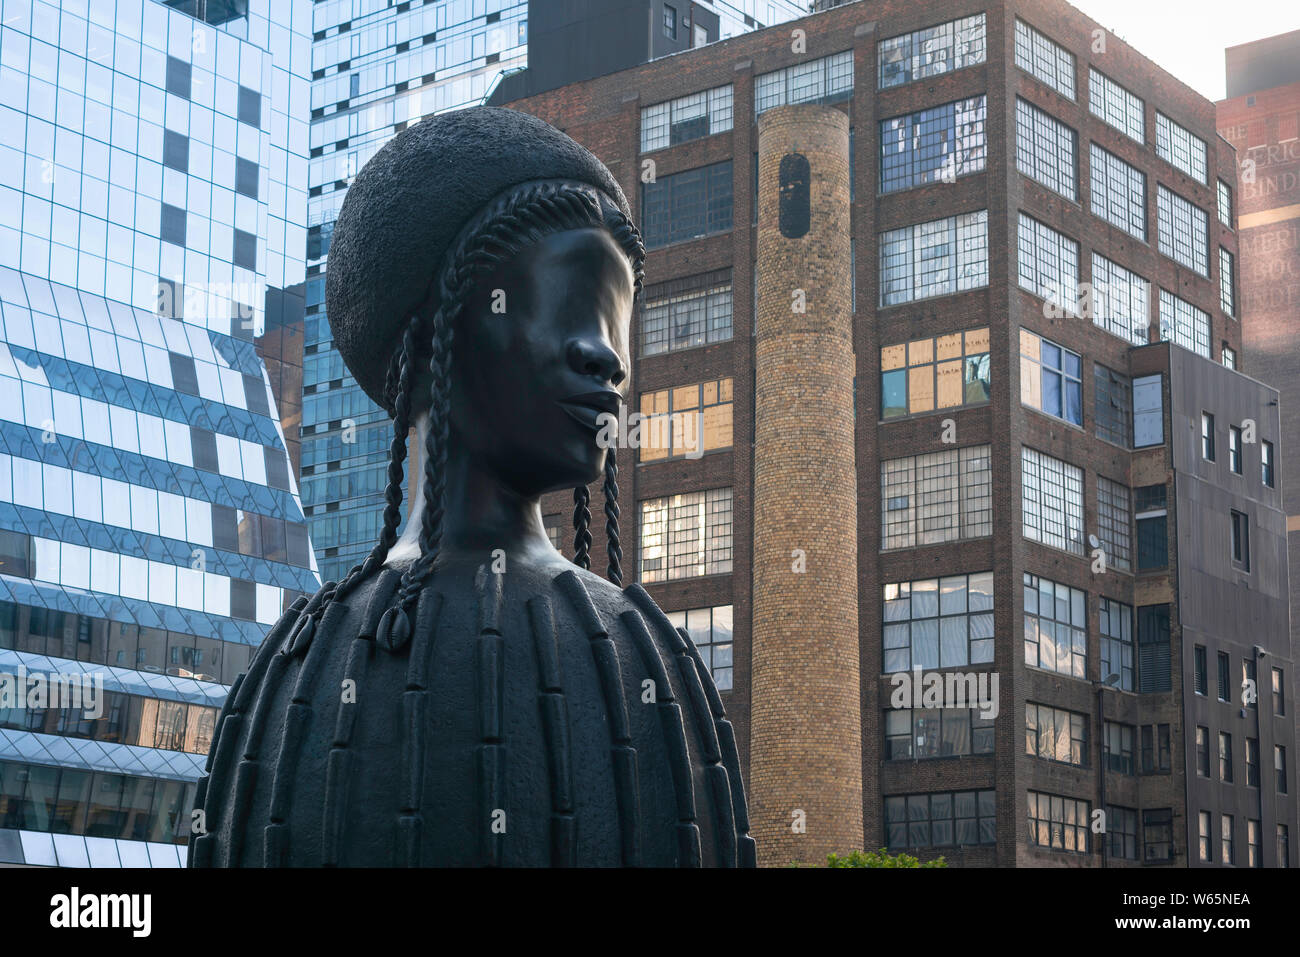 View of the monumental sculpture titled Brick House, by Simone Leigh, sited on the High Line in the Chelsea area of Manhattan, New York City, USA. Stock Photo